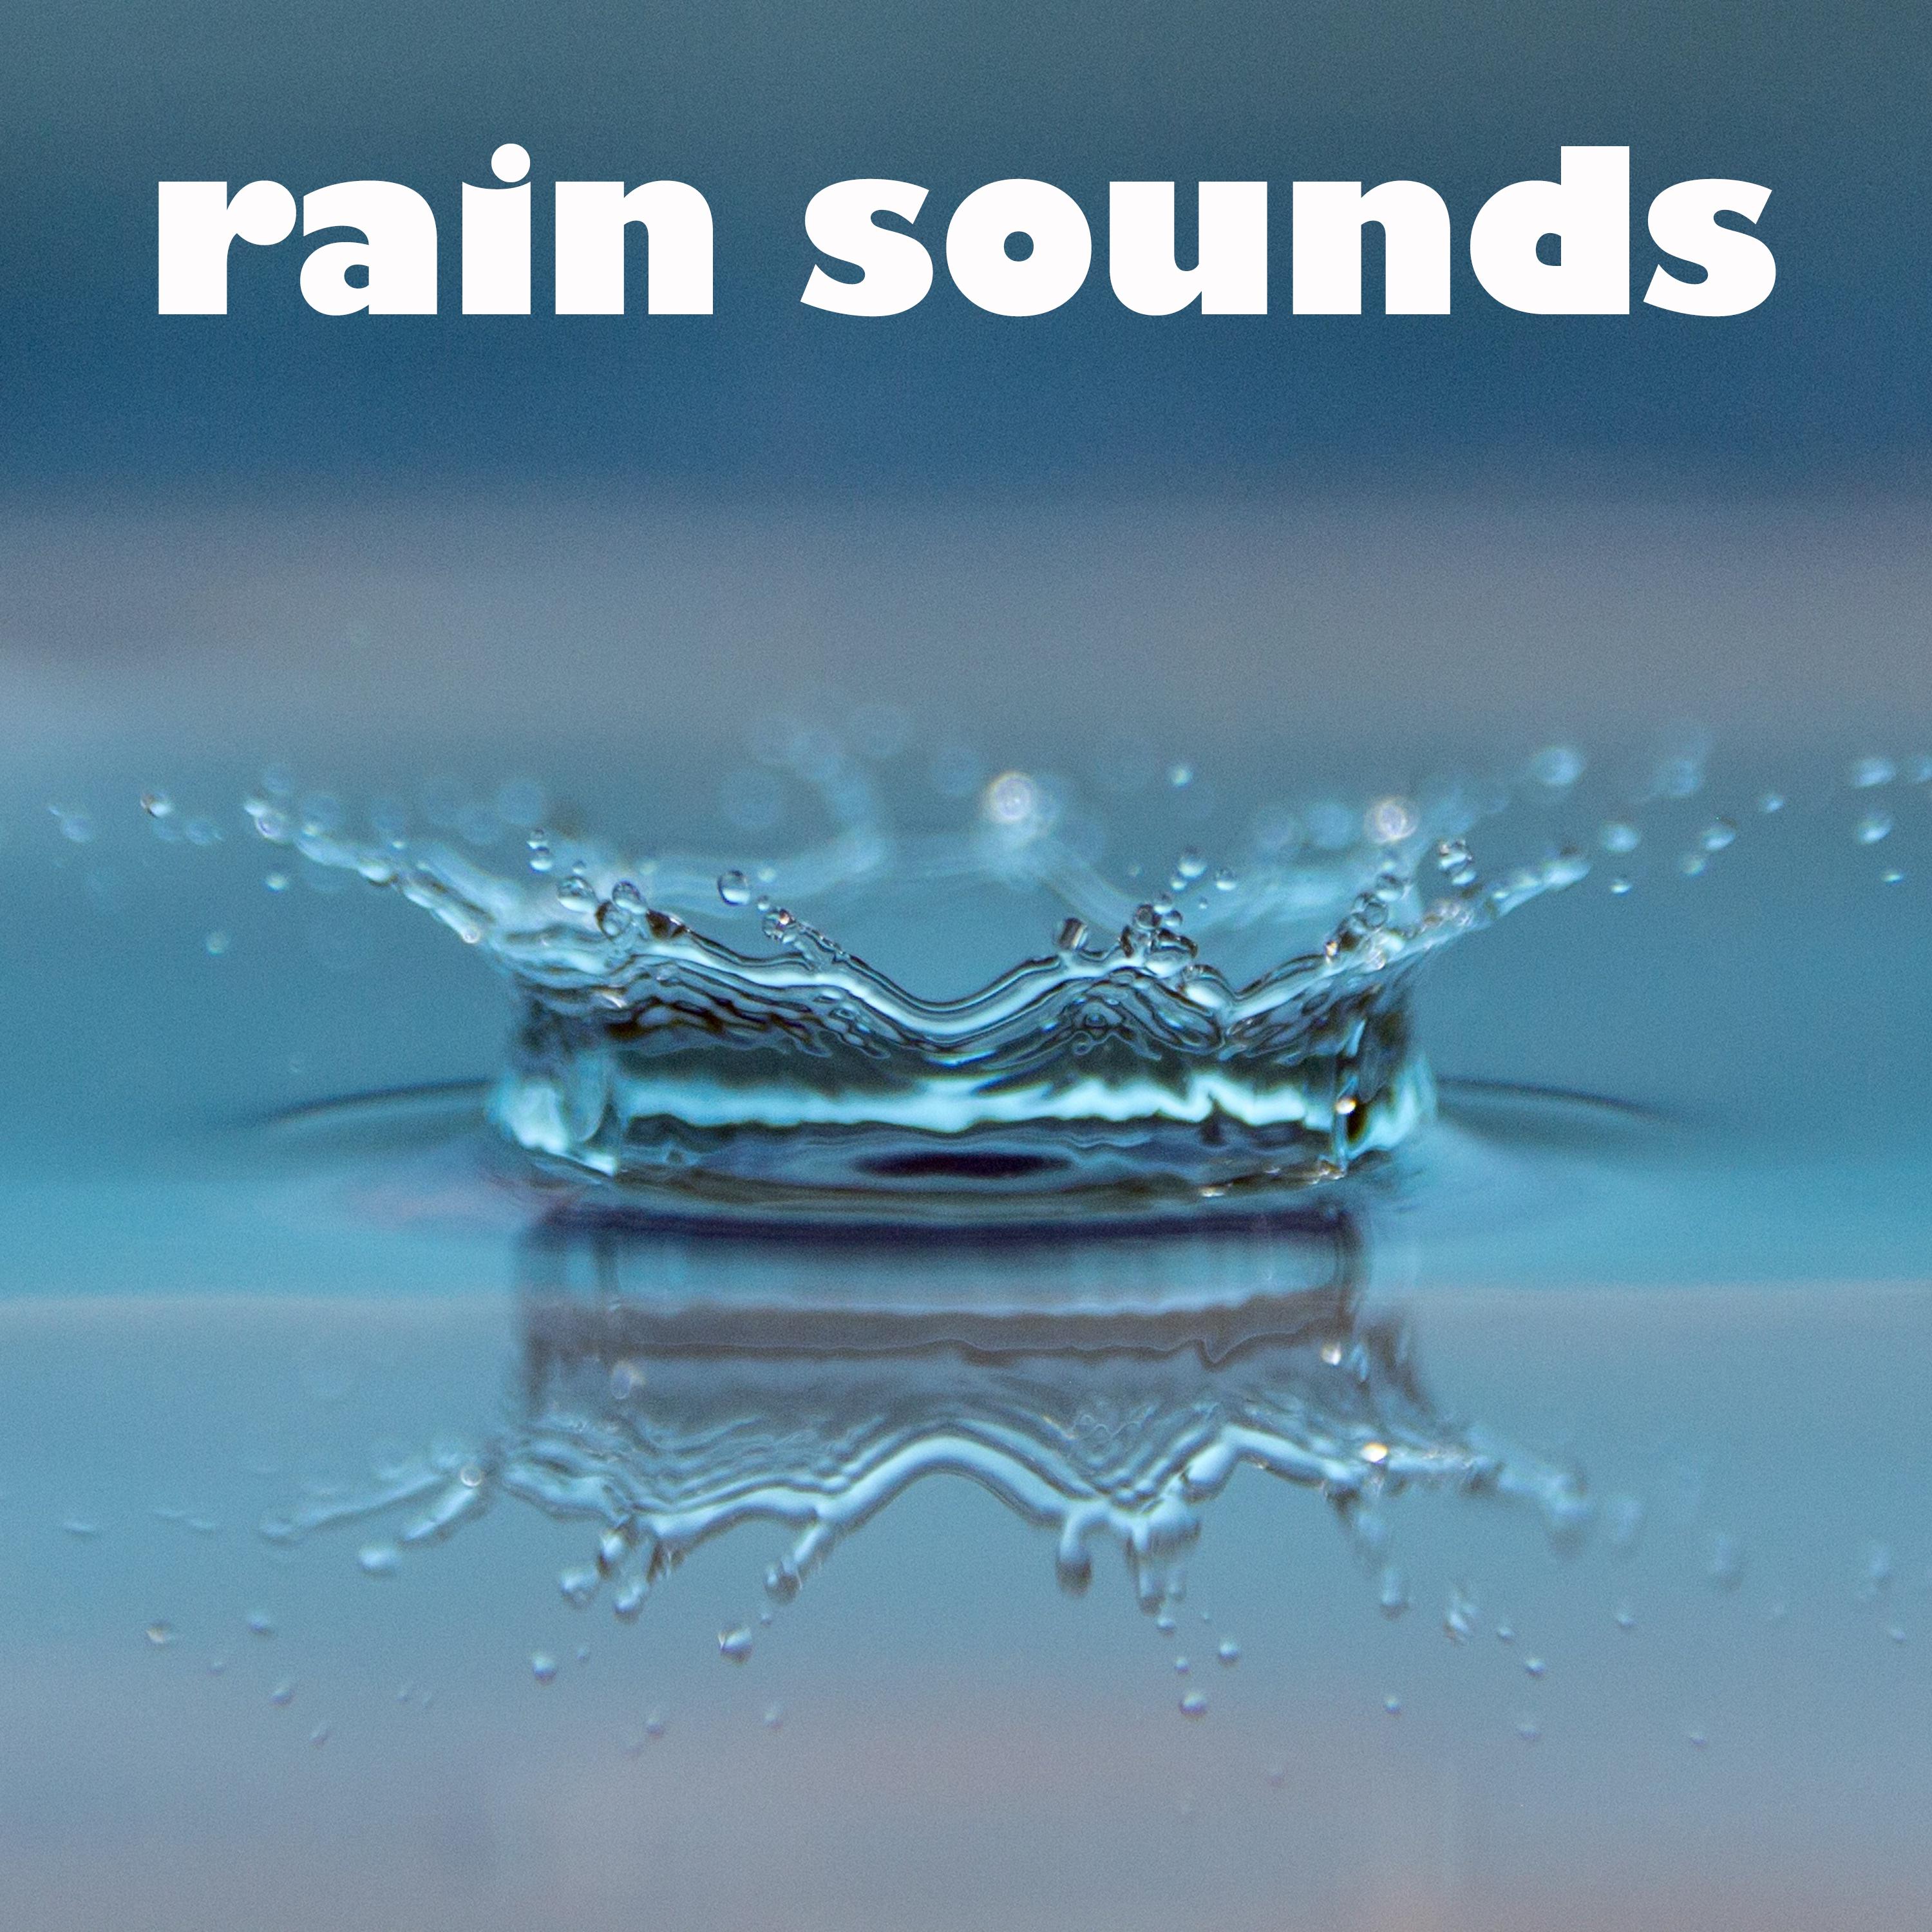 10 of The Best Rain Sounds for Ultimate Relaxation, Concentration, Sleep, Zen and Spa